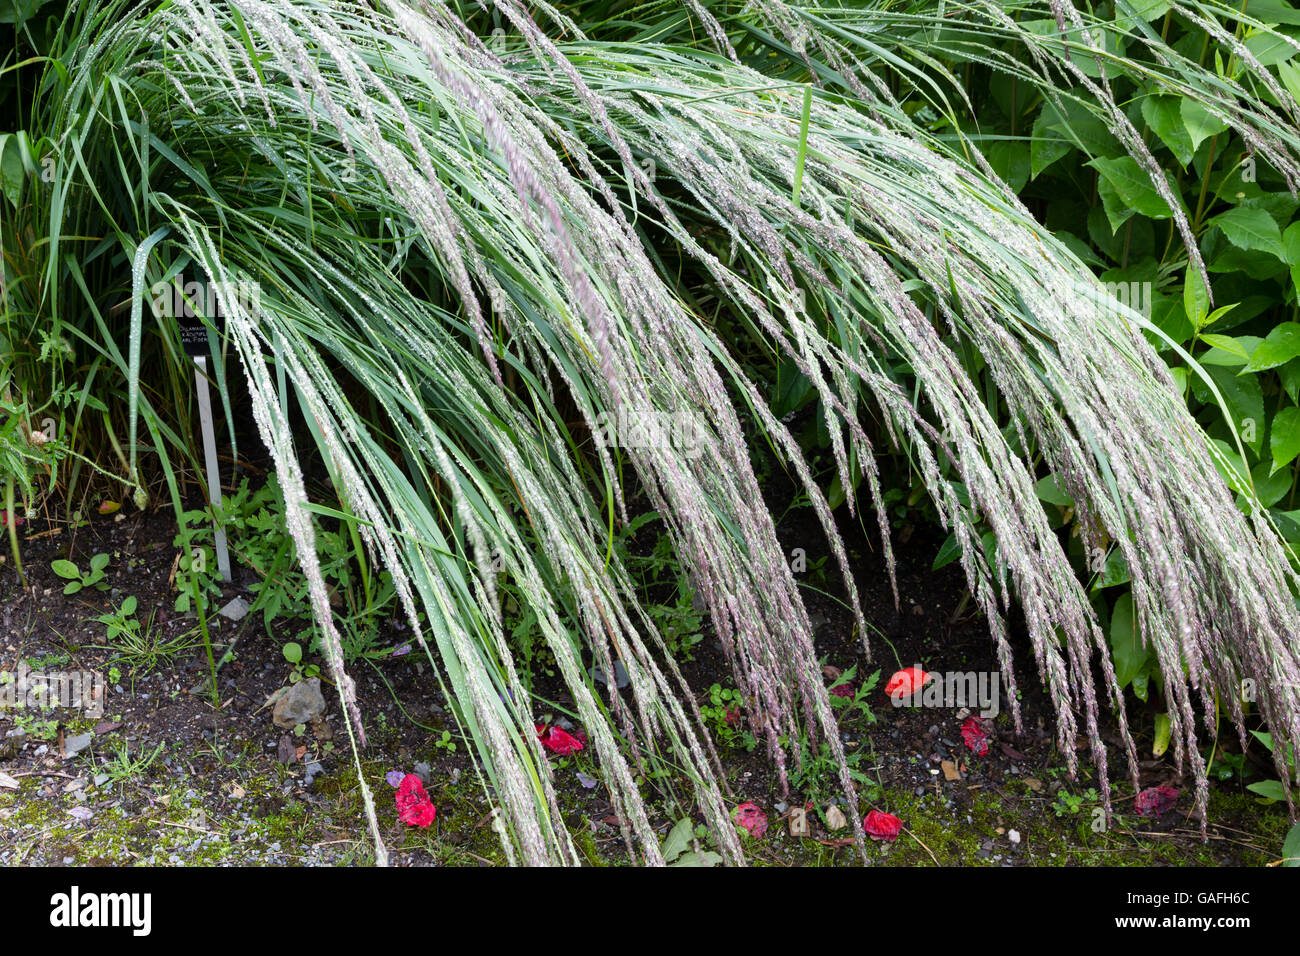 Arching, rain wet flower heads and foliage of the feather reed-grass, Calamagrostis × acutiflora 'Karl Foerster' Stock Photo